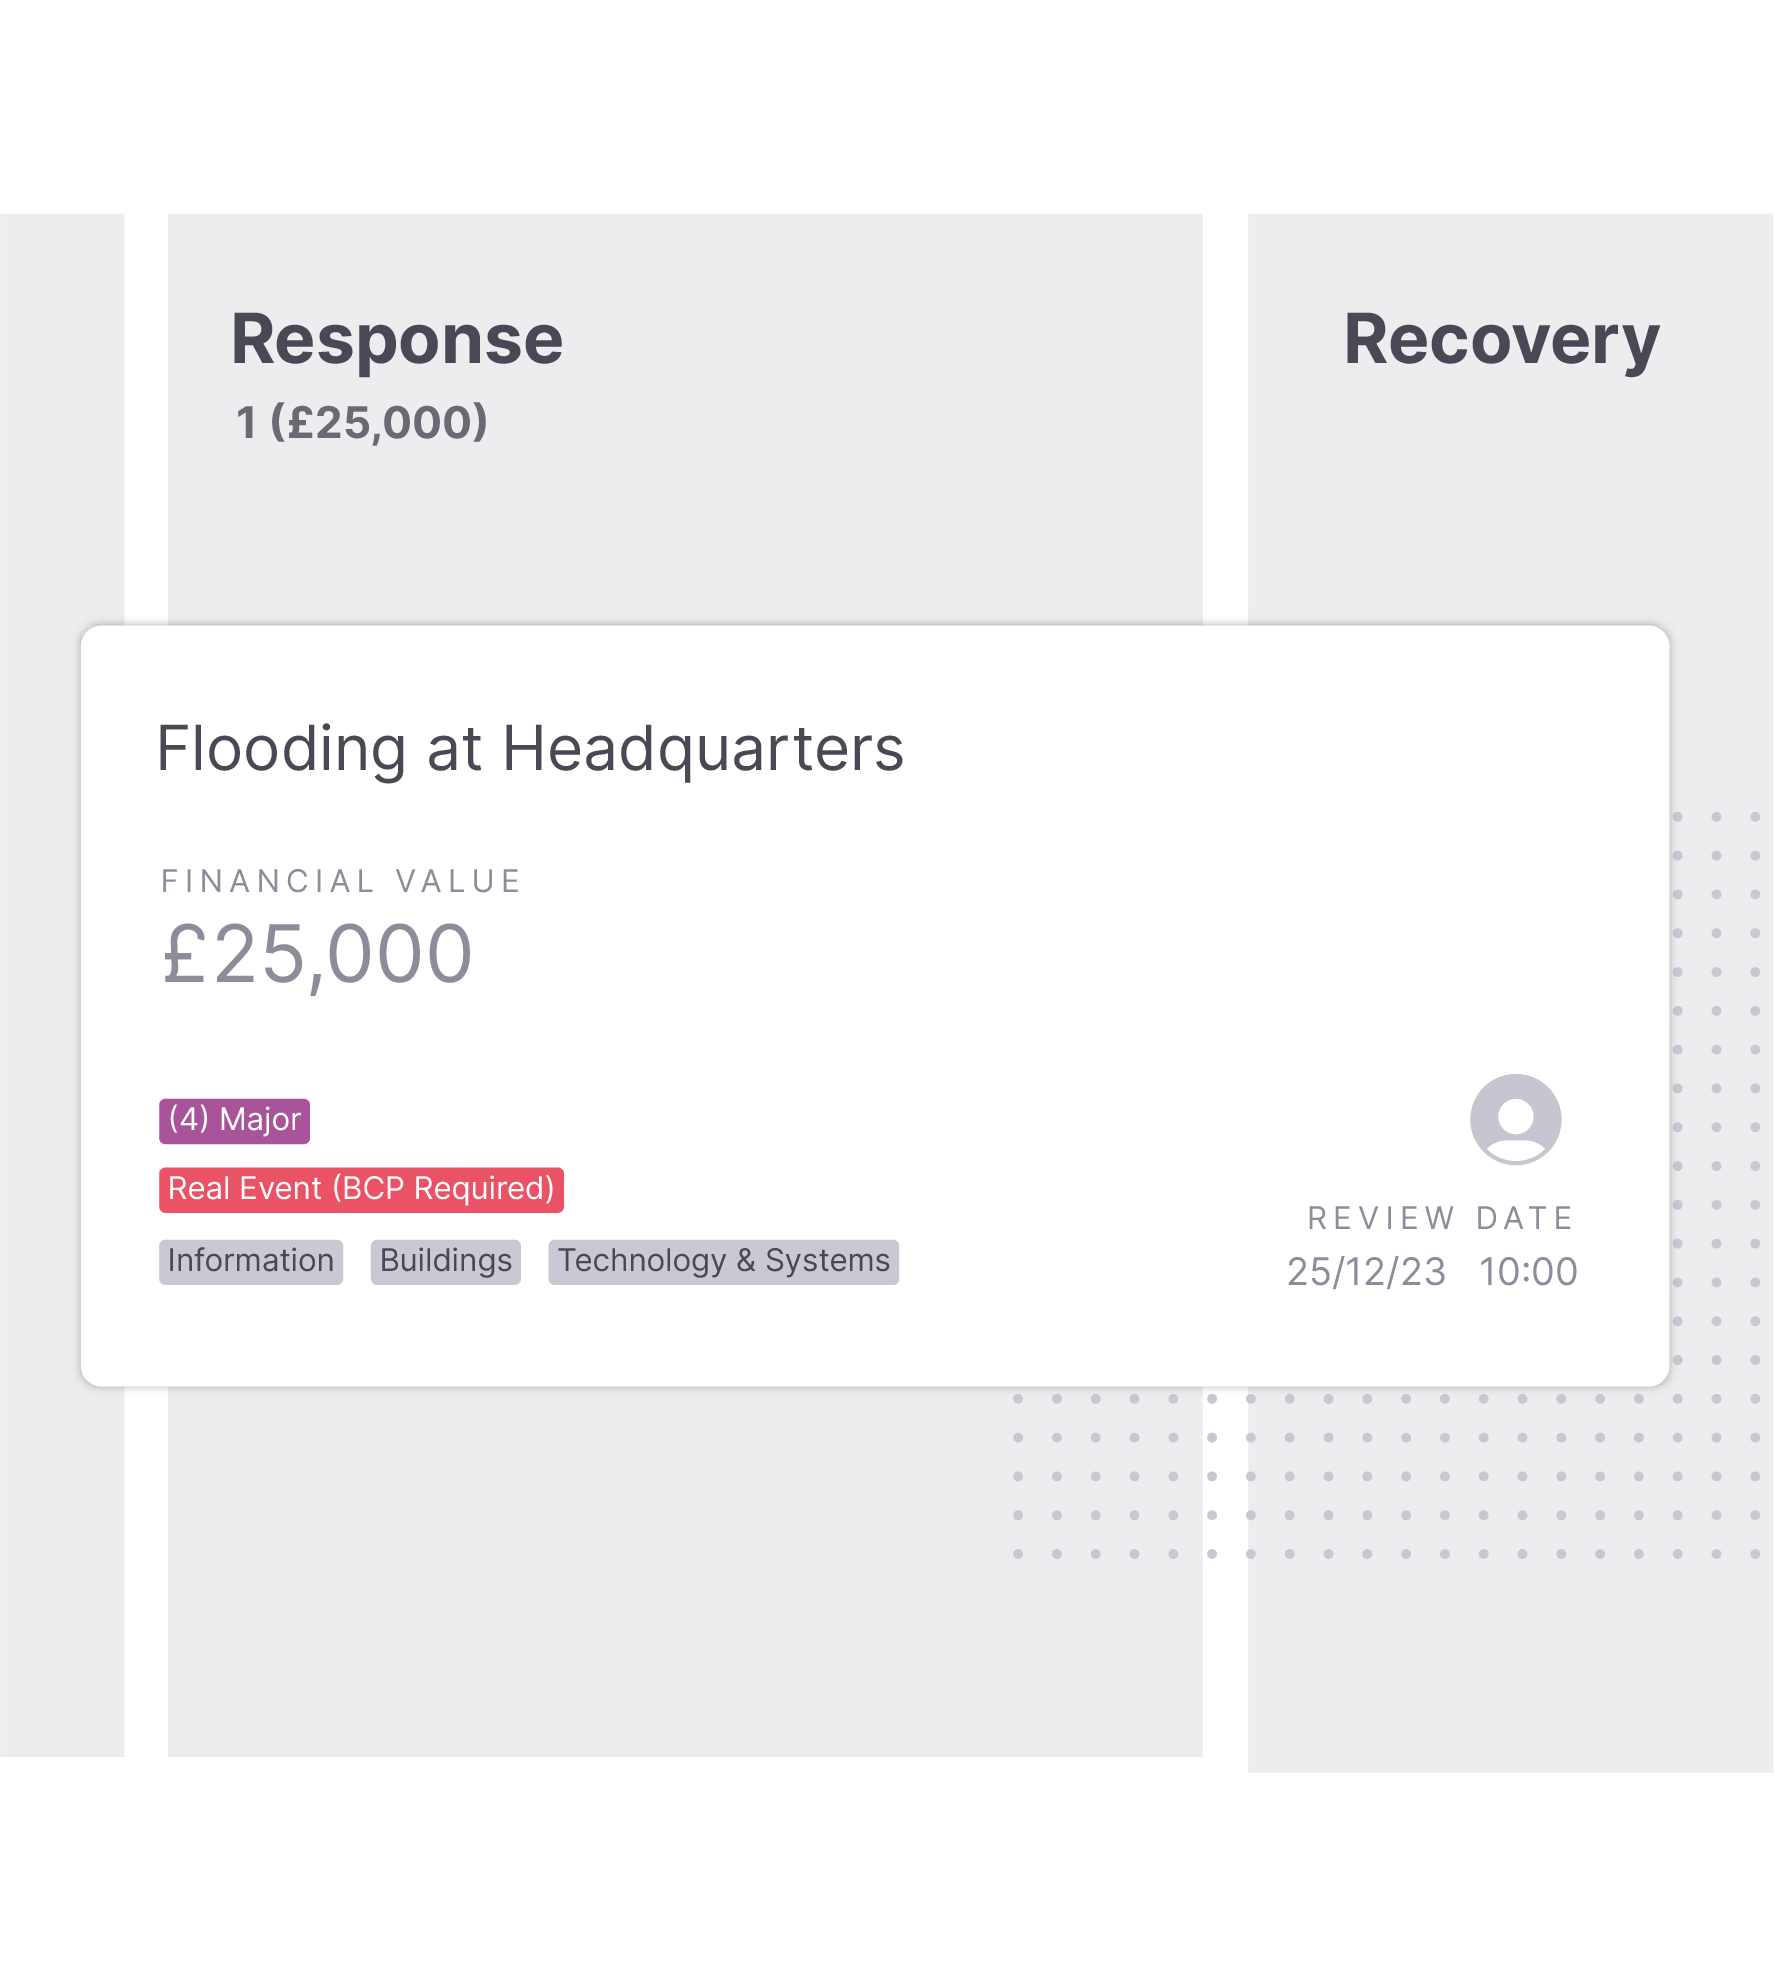 Our Incident Response and Impact Assessment Trackers are designed to make management simple but effective.